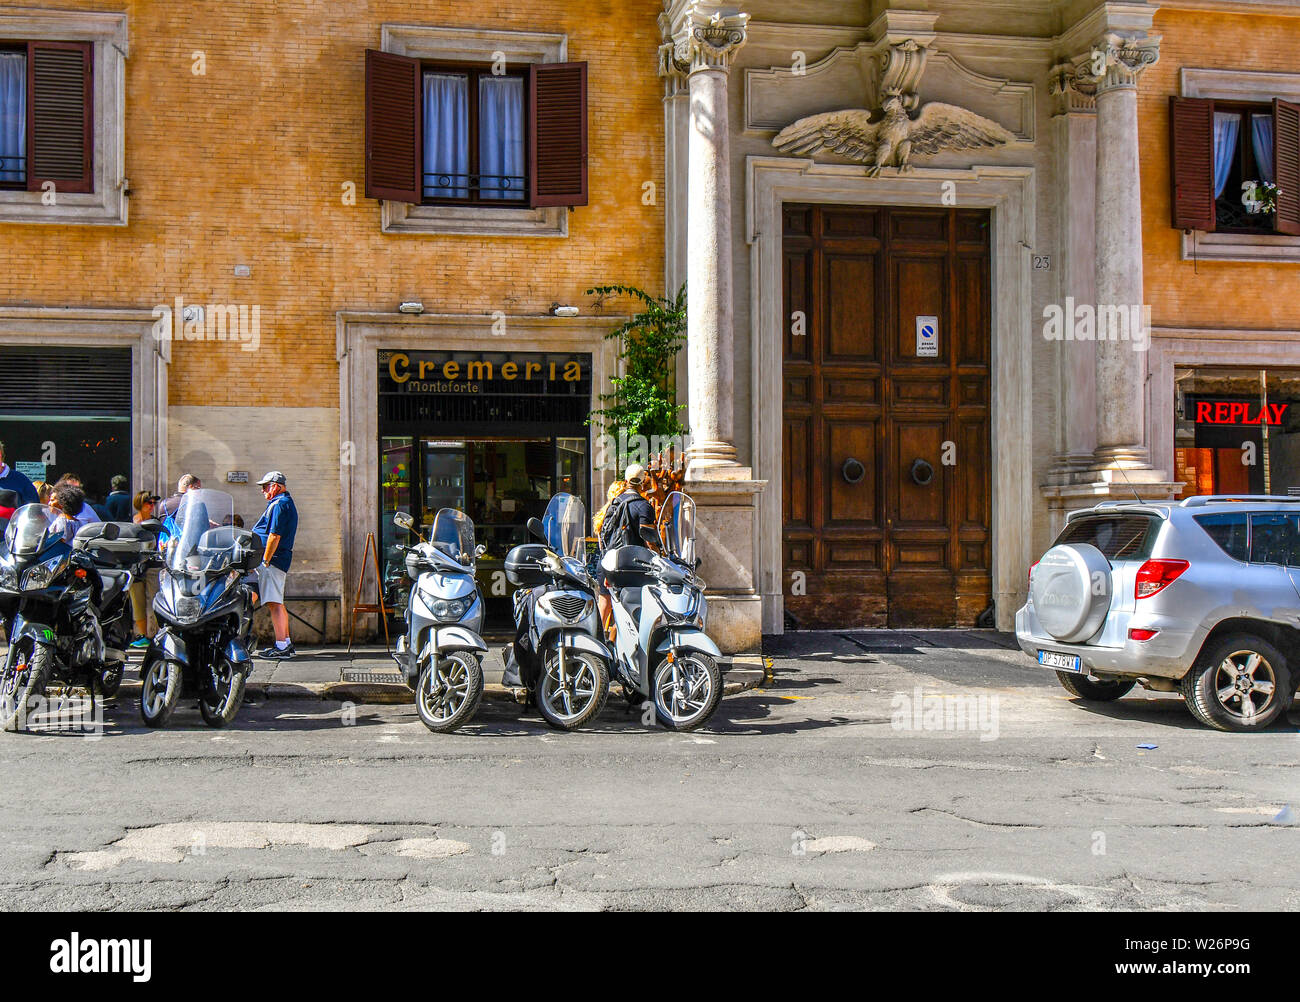 Motorcycles parked in a line outside a gelateria cremeria or ice cream shop as tourists pass by in the historic center of Rome, Italy Stock Photo